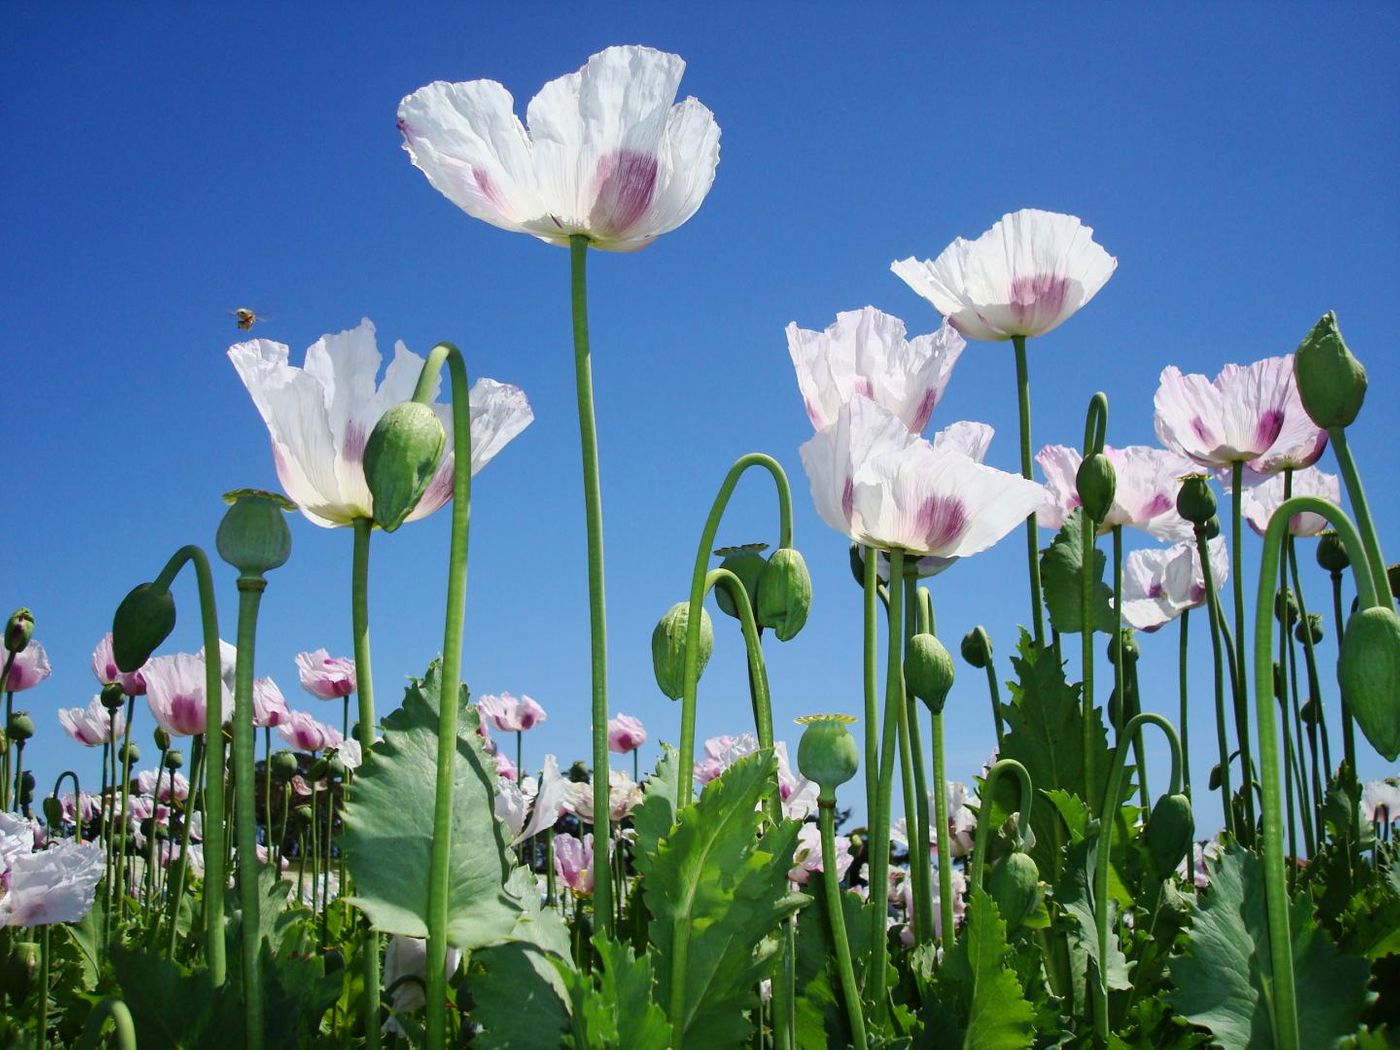 Scientists have sequenced the opium poppy genome, providing insight into how the plant produces compounds that are used to make medicine. It paves the way for improving this plant's husbandry, securing a reliable, cheap supply of the drugs it creates. / Credit: Carol Walker